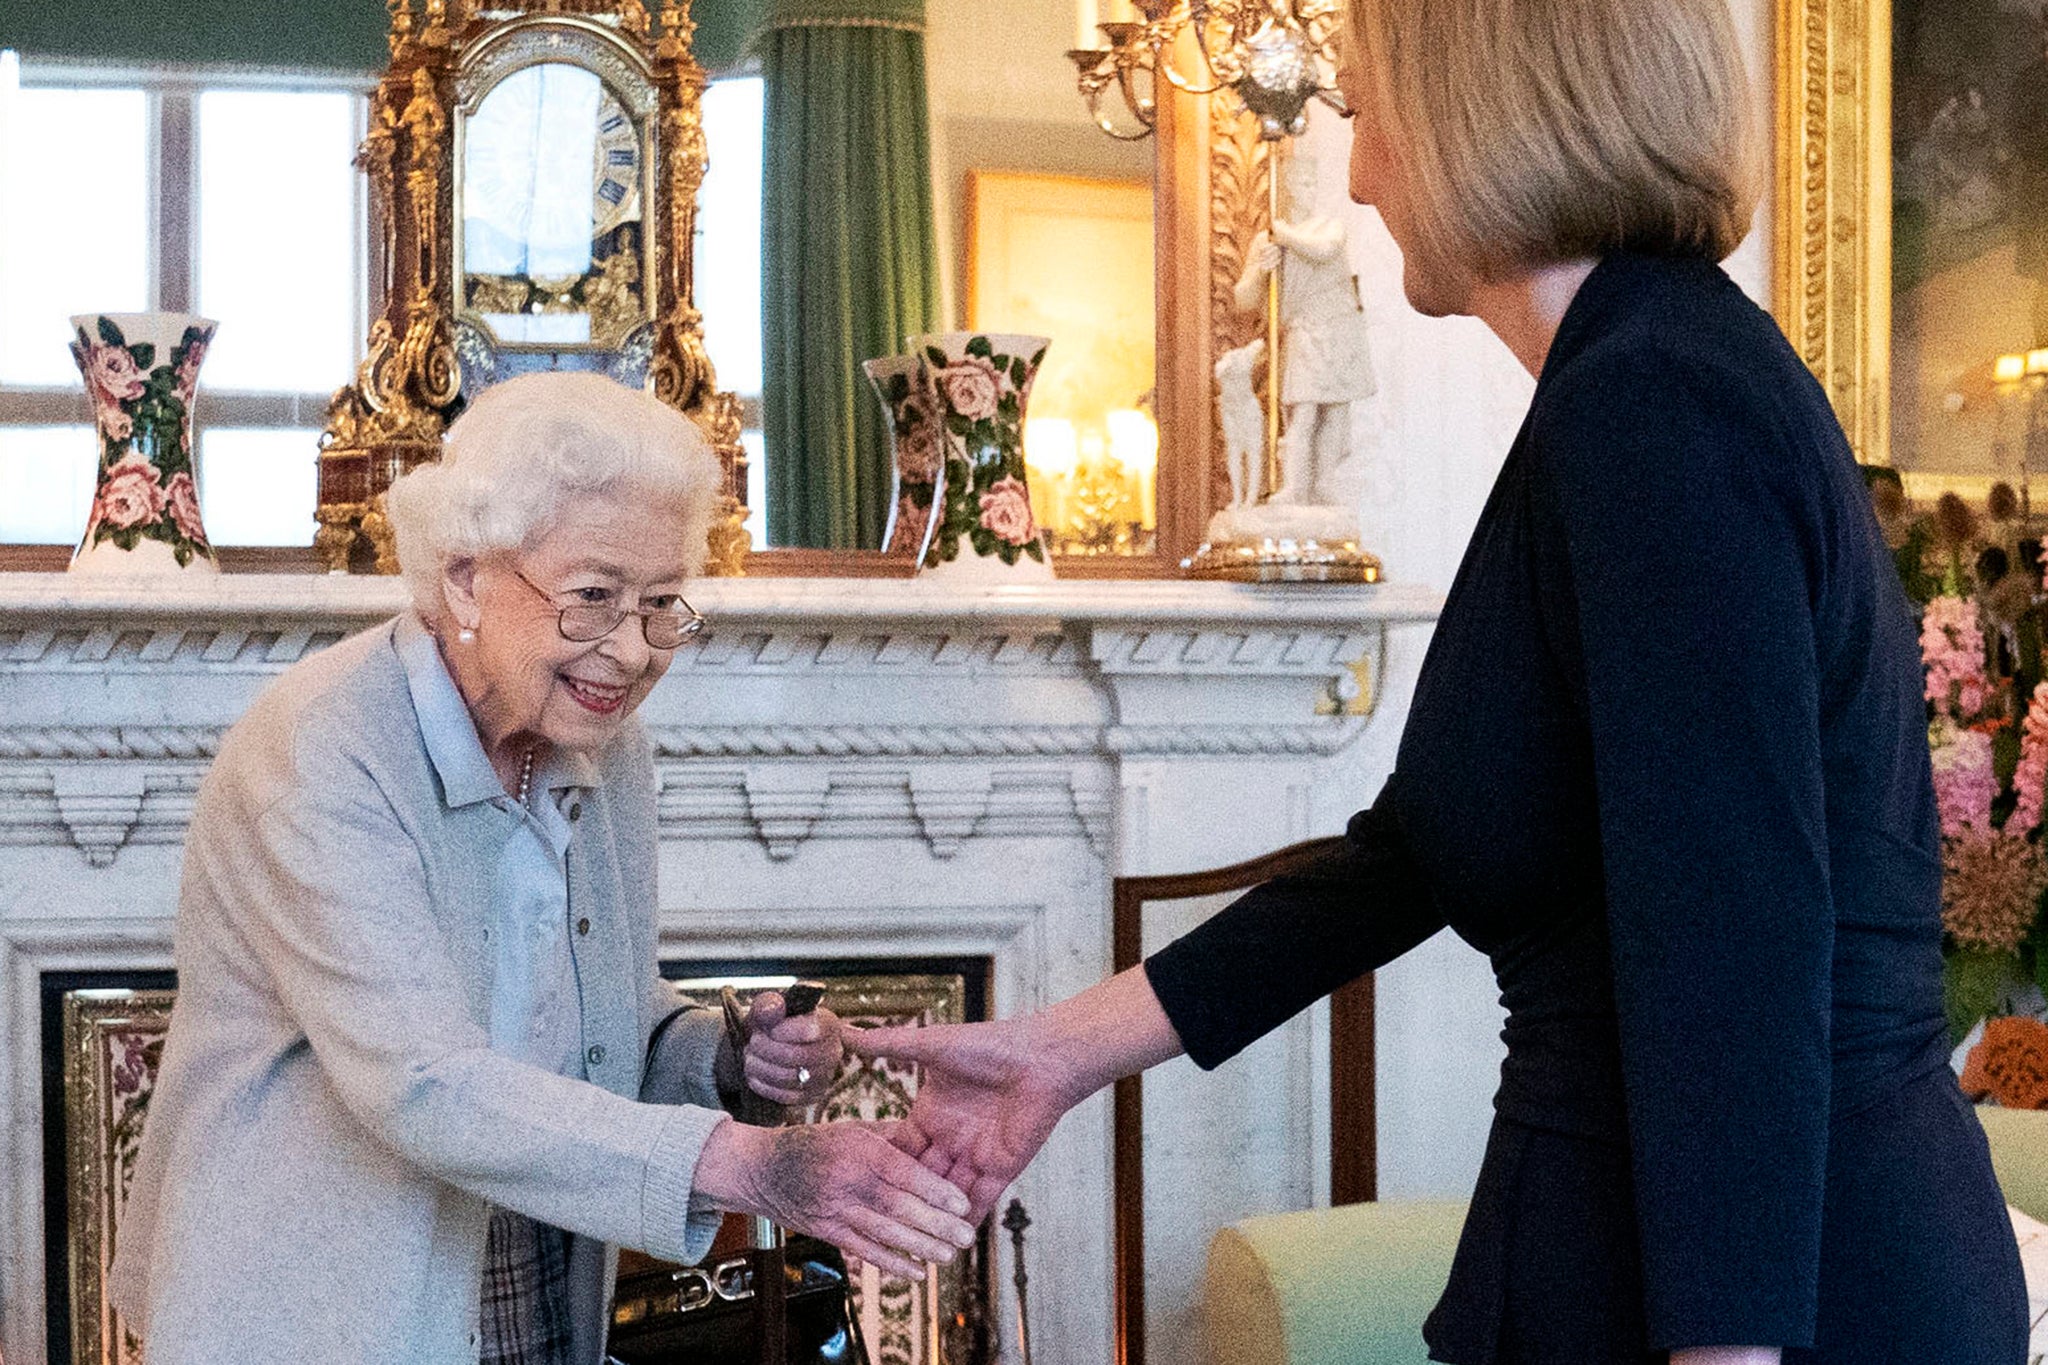 The meeting produced the last public photograph of the late Queen before she died on 8 September 2022 at her Scottish residence